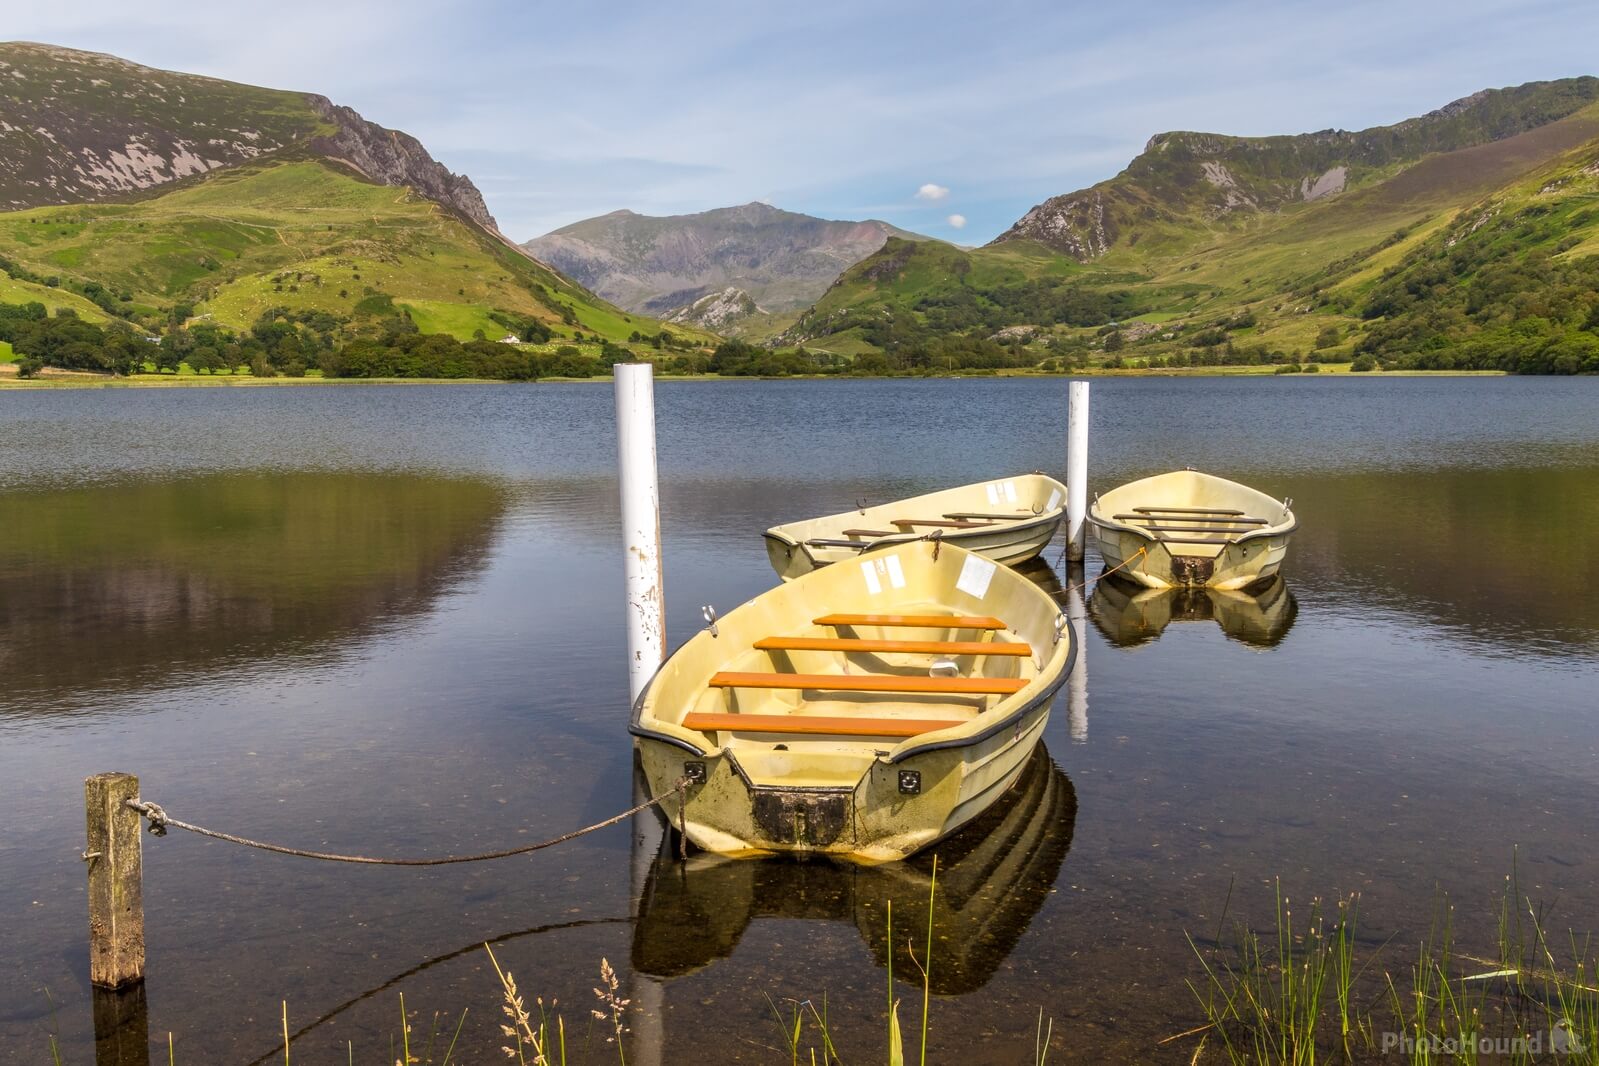 Image of Llyn Nantlle by Andy Killingbeck